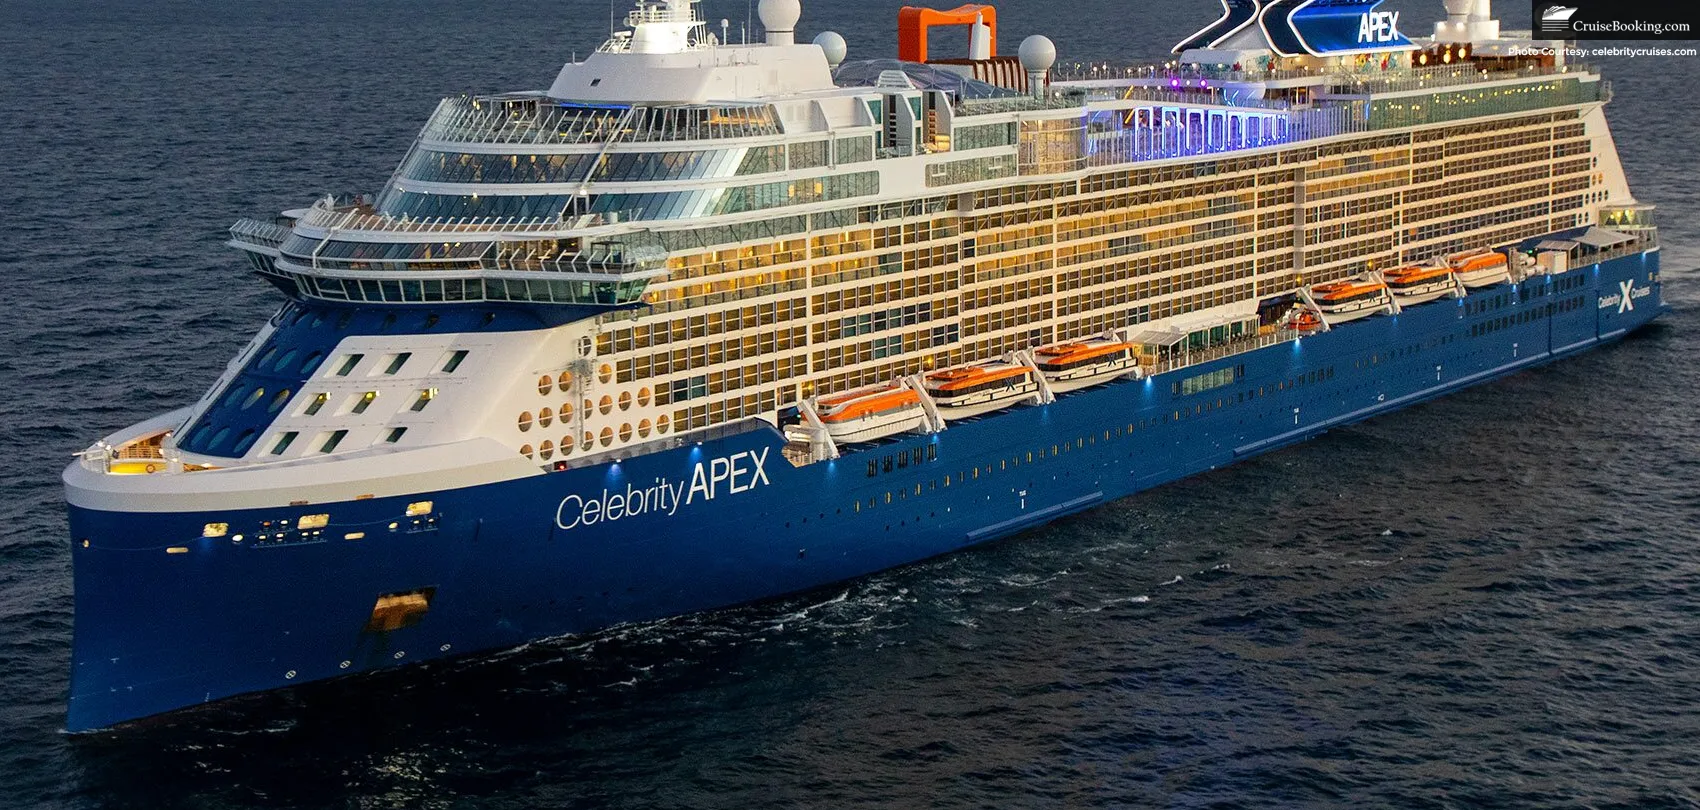 Celebrity Apex Commences its Journey from Southampton